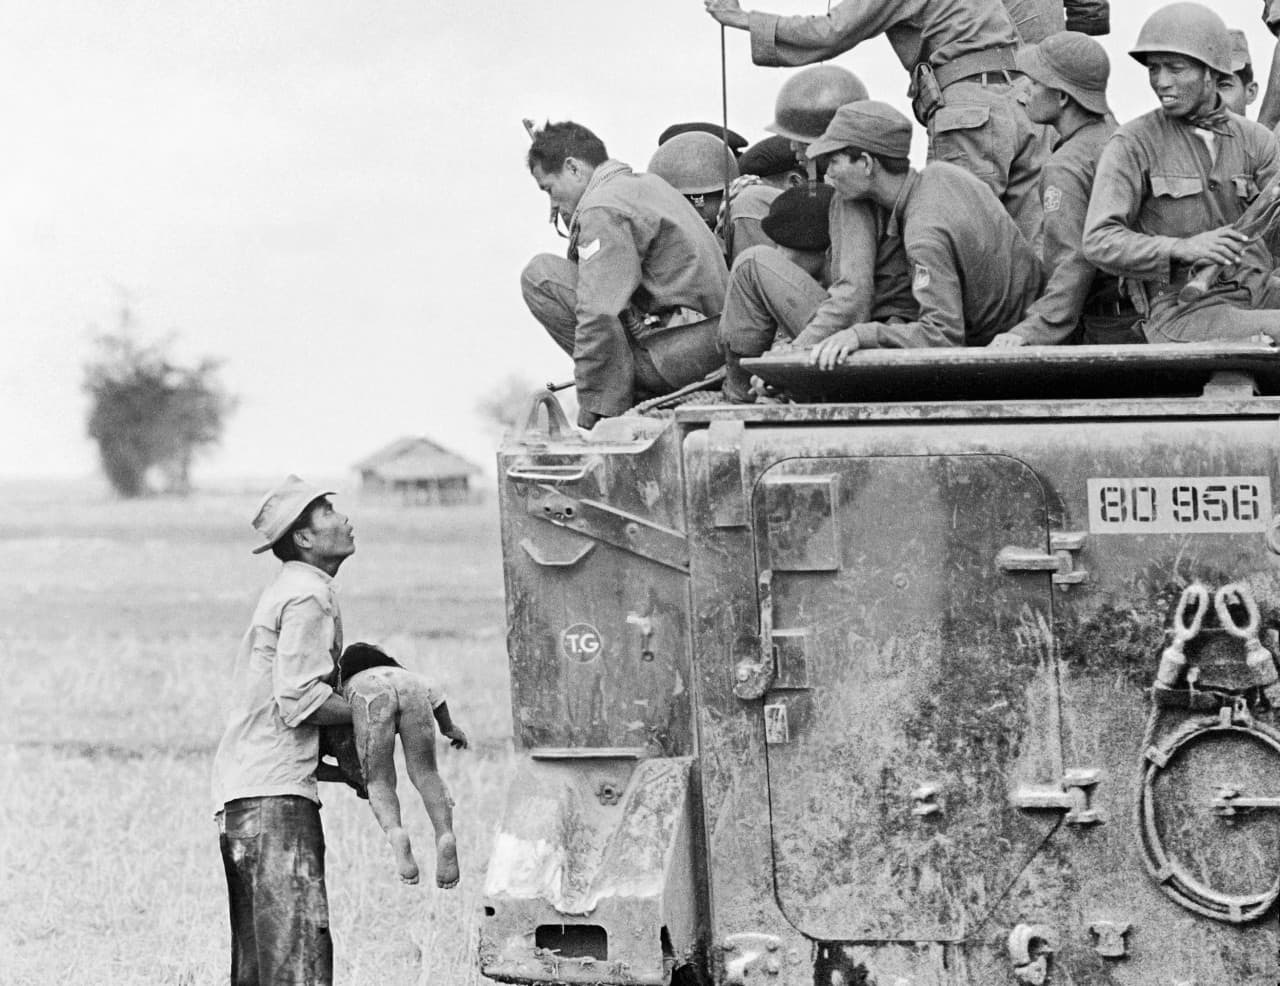 A distraught father holds the body of his child as South Vietnamese Rangers look down from their armored vehicle, March 19, 1964. The child was killed as government forces pursued guerrillas into a village near the Cambodian border. From the portfolio by photographer Horst Faas that received the 1965 Pulitzer Prize for Photography. (Horst Faas/AP)